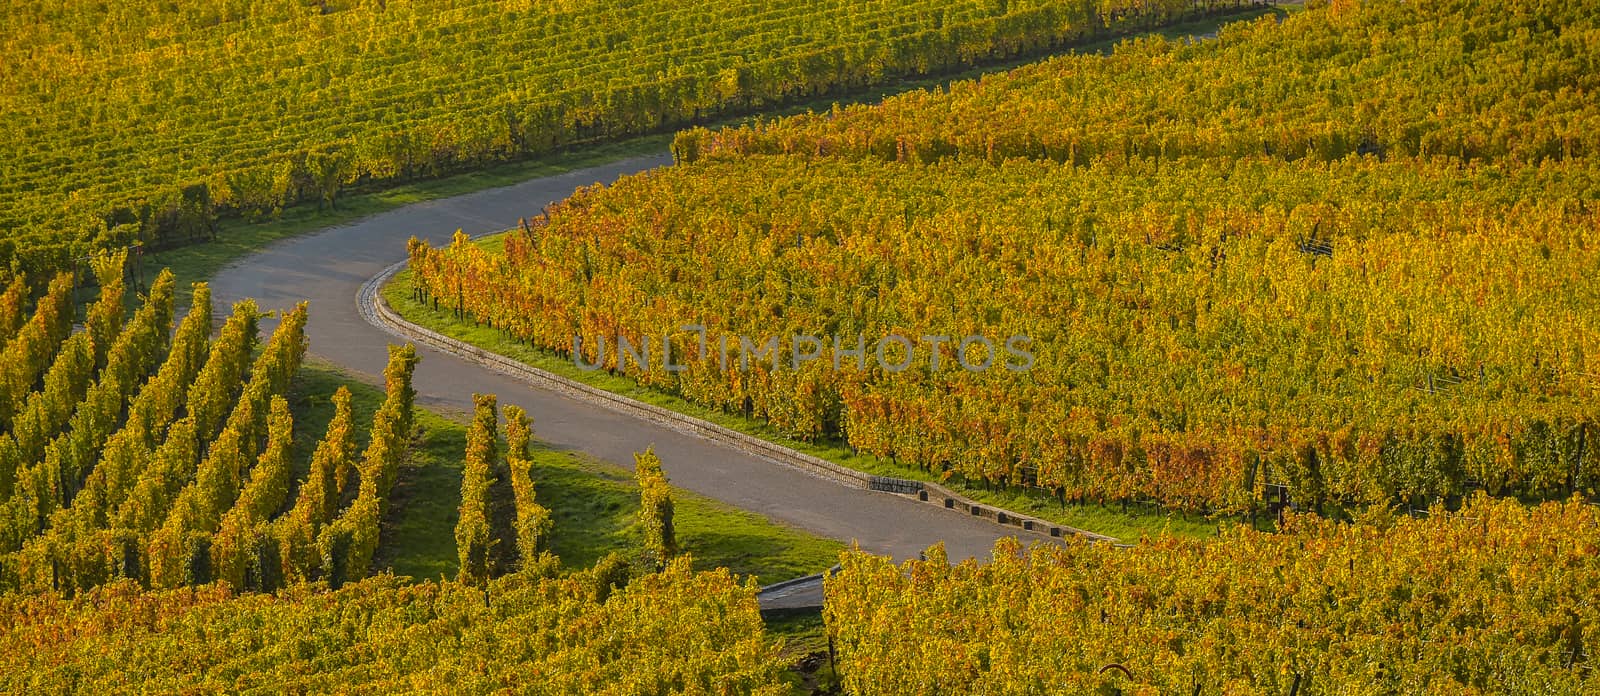 Alsace Vineyards, in autumn, France, Europe